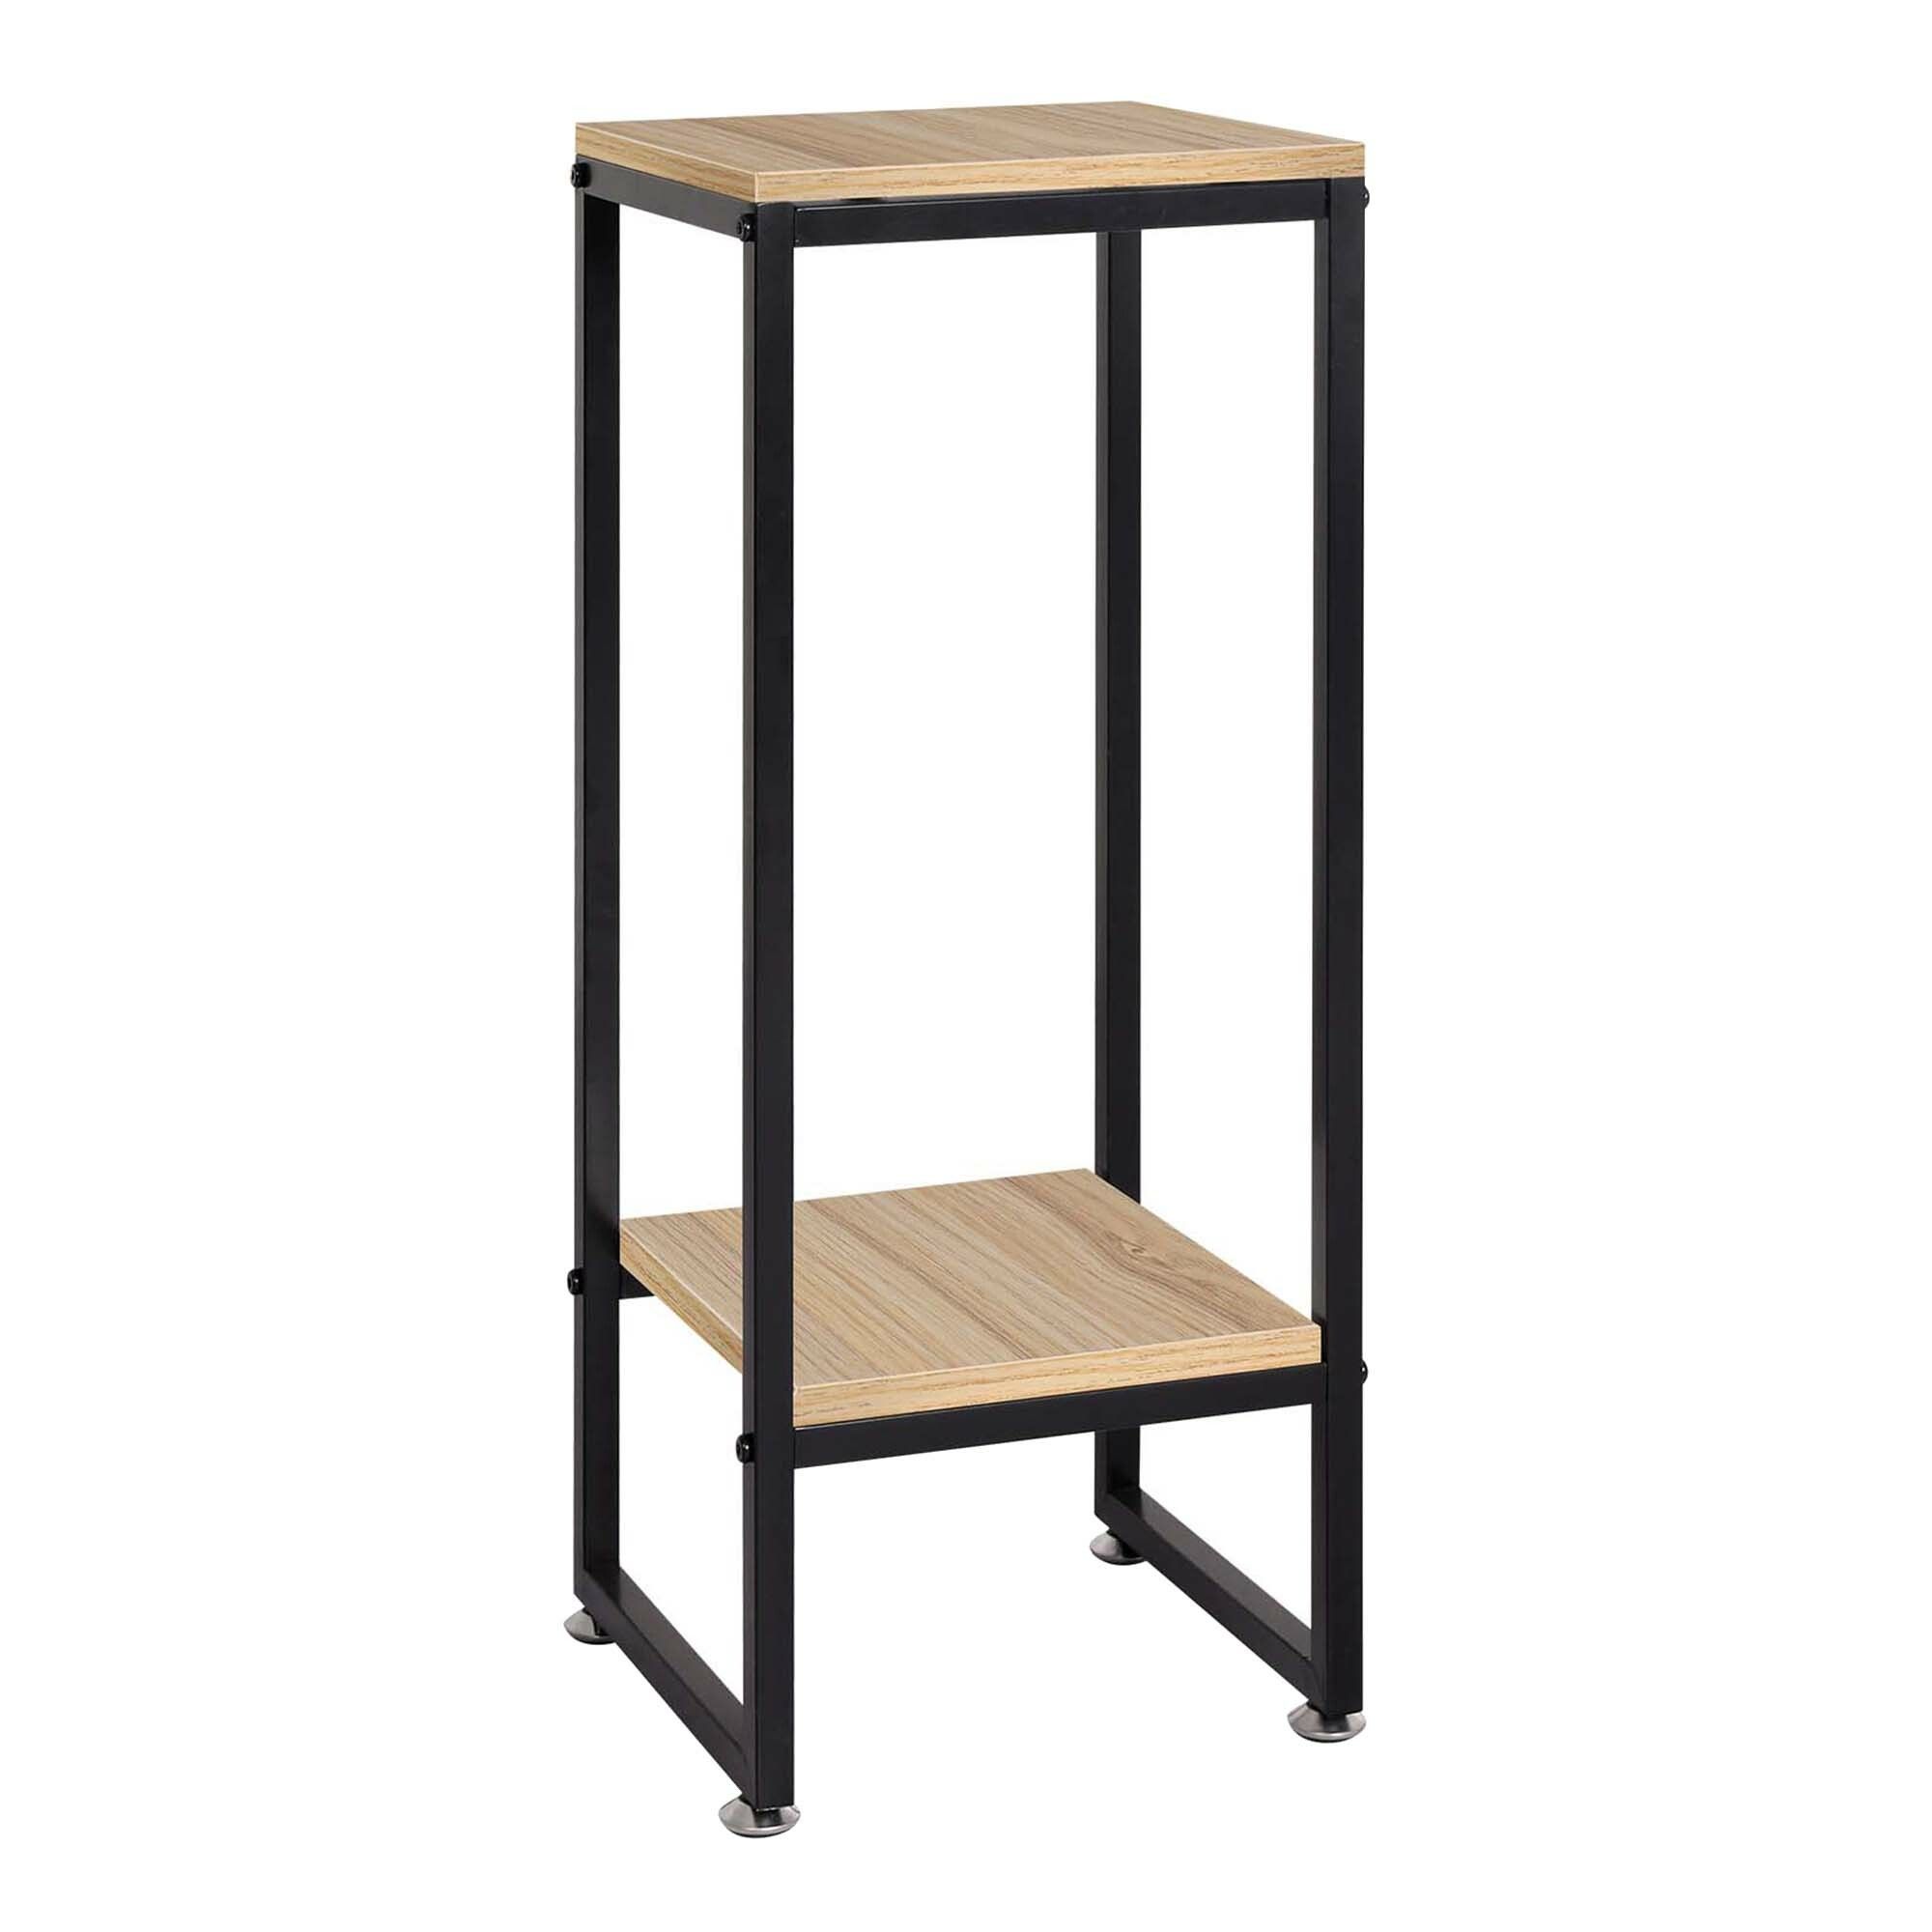 Oakleigh Home Lucille 2 Tier Plant Stand | Temple & Webster With Regard To Two Tier Plant Stands (View 11 of 15)